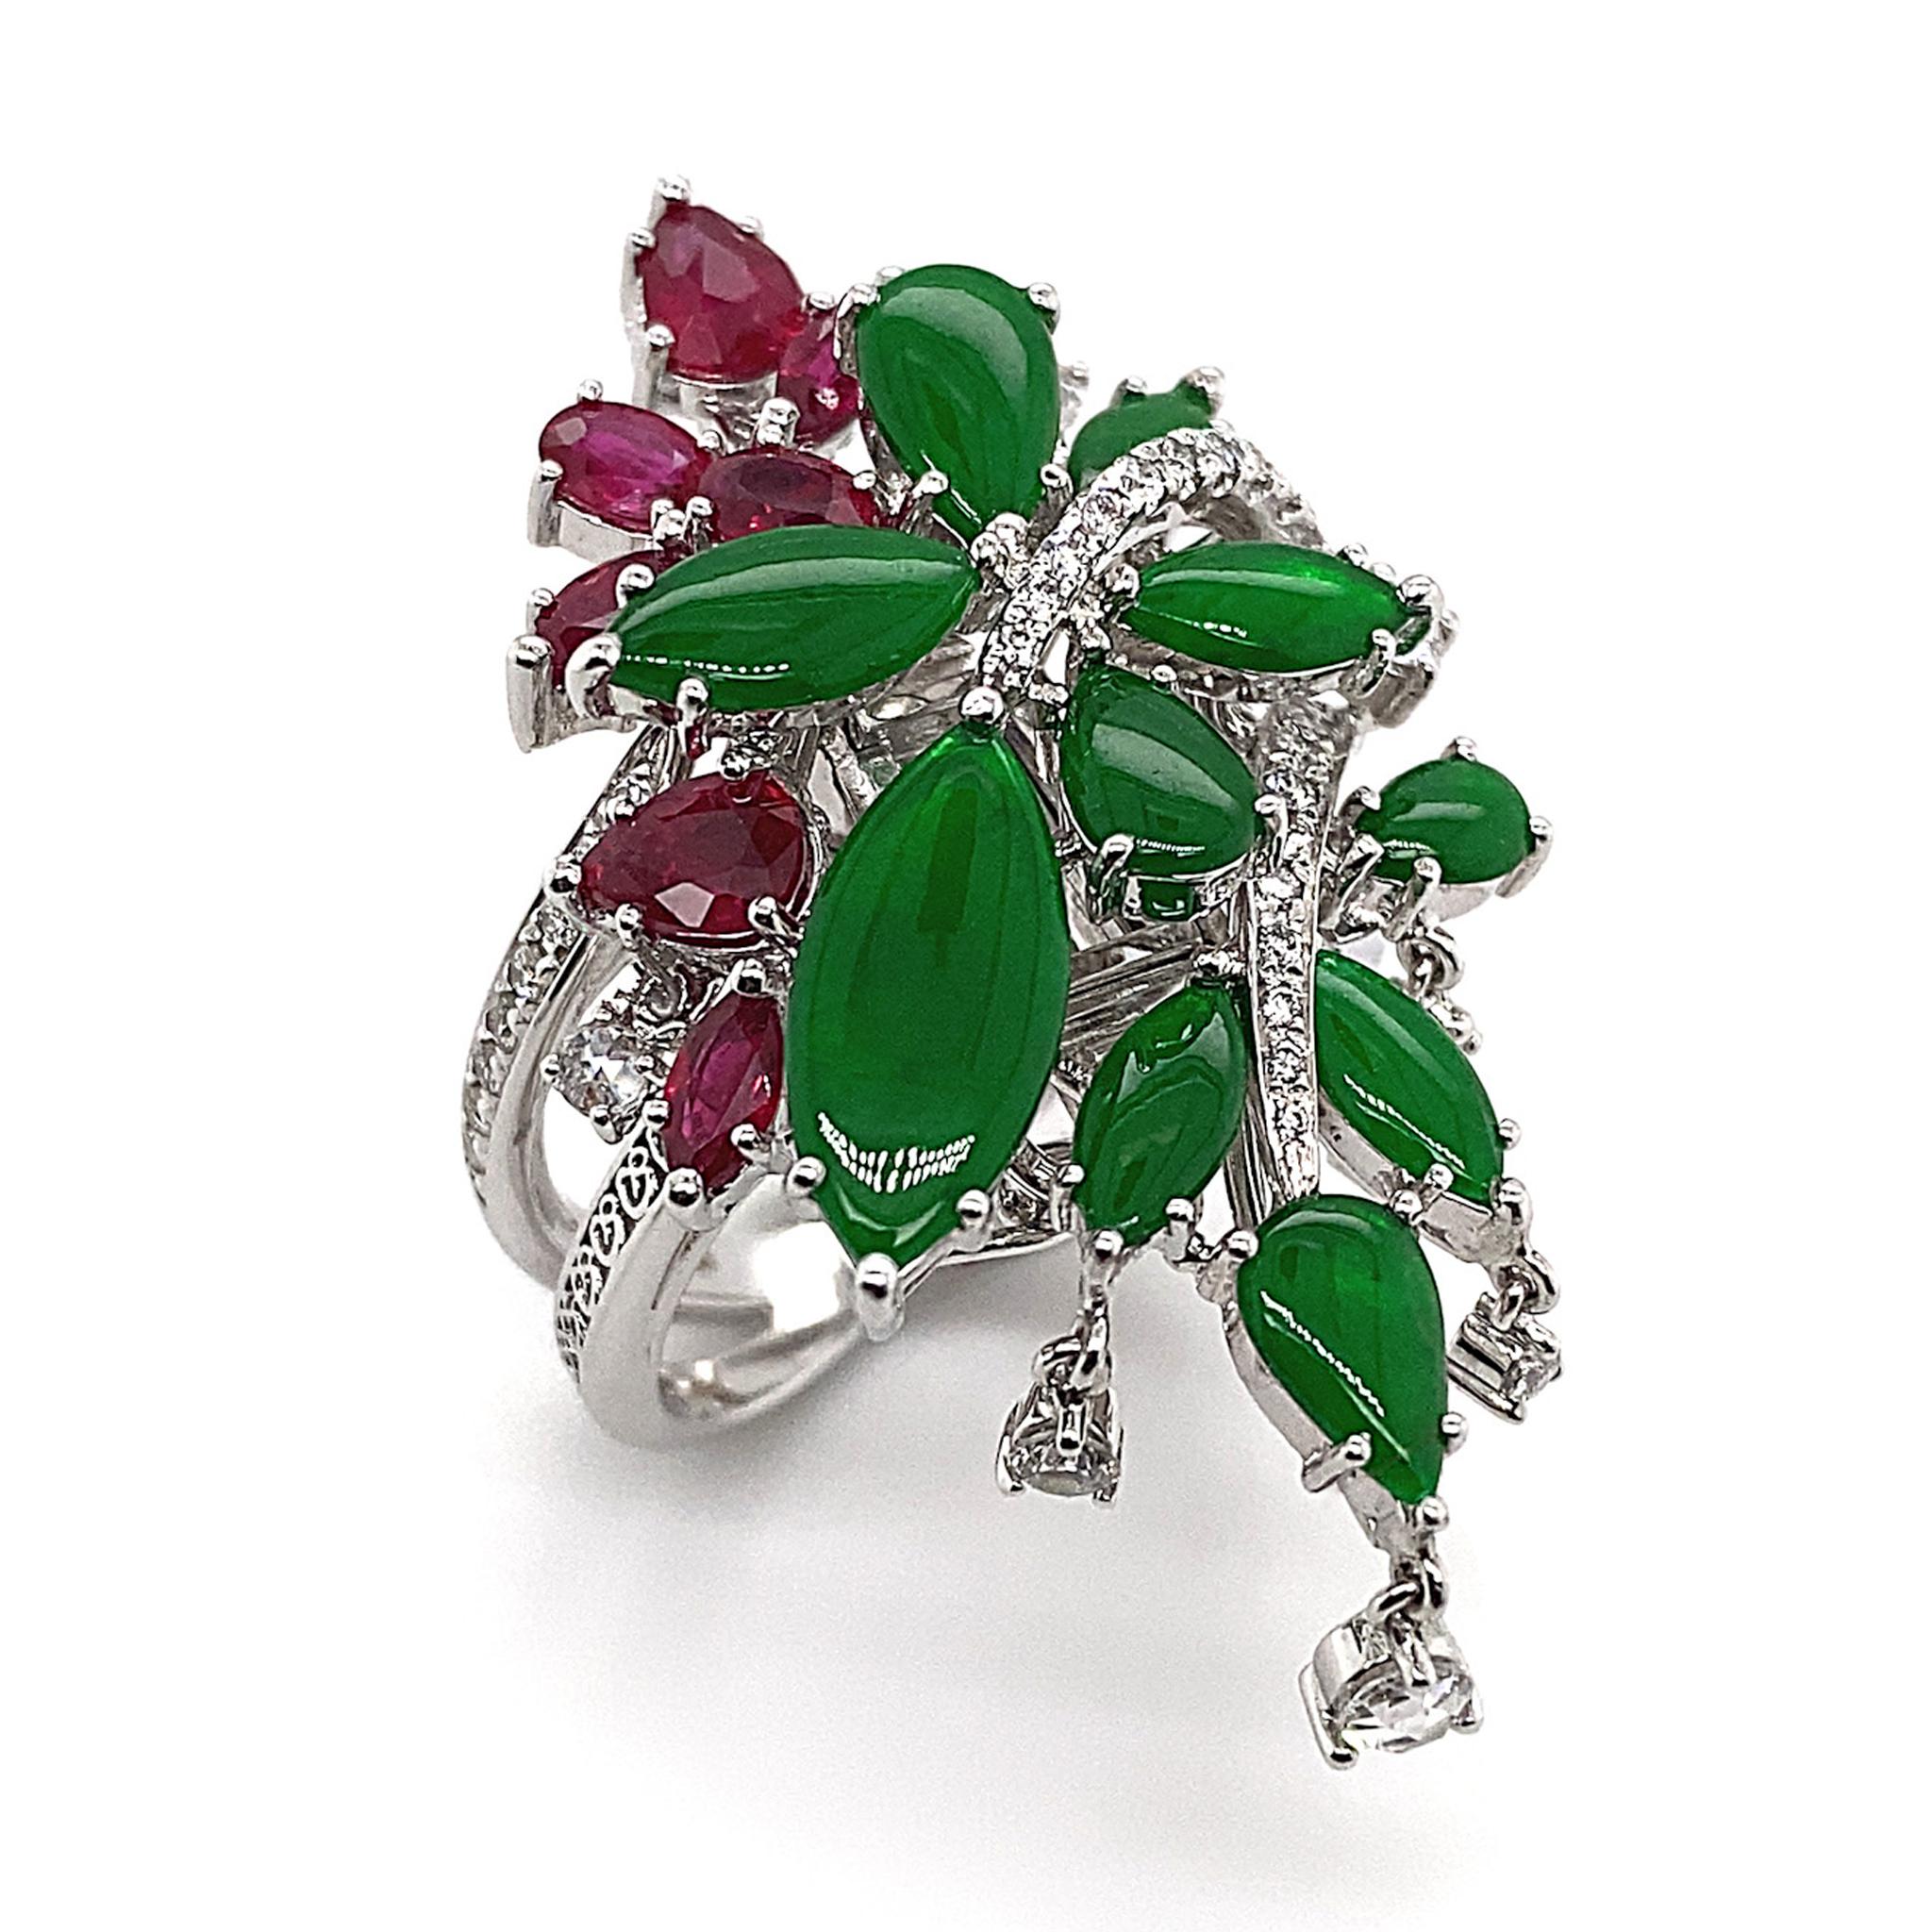 The House of Dilys’ presents an impressive floral-inspired ring adorned with top quality 'Imperial Green' jadeite, rubies and collection grade diamonds. Another stunning piece from Dilys' jadeite collection. 

Influenced by the flower that